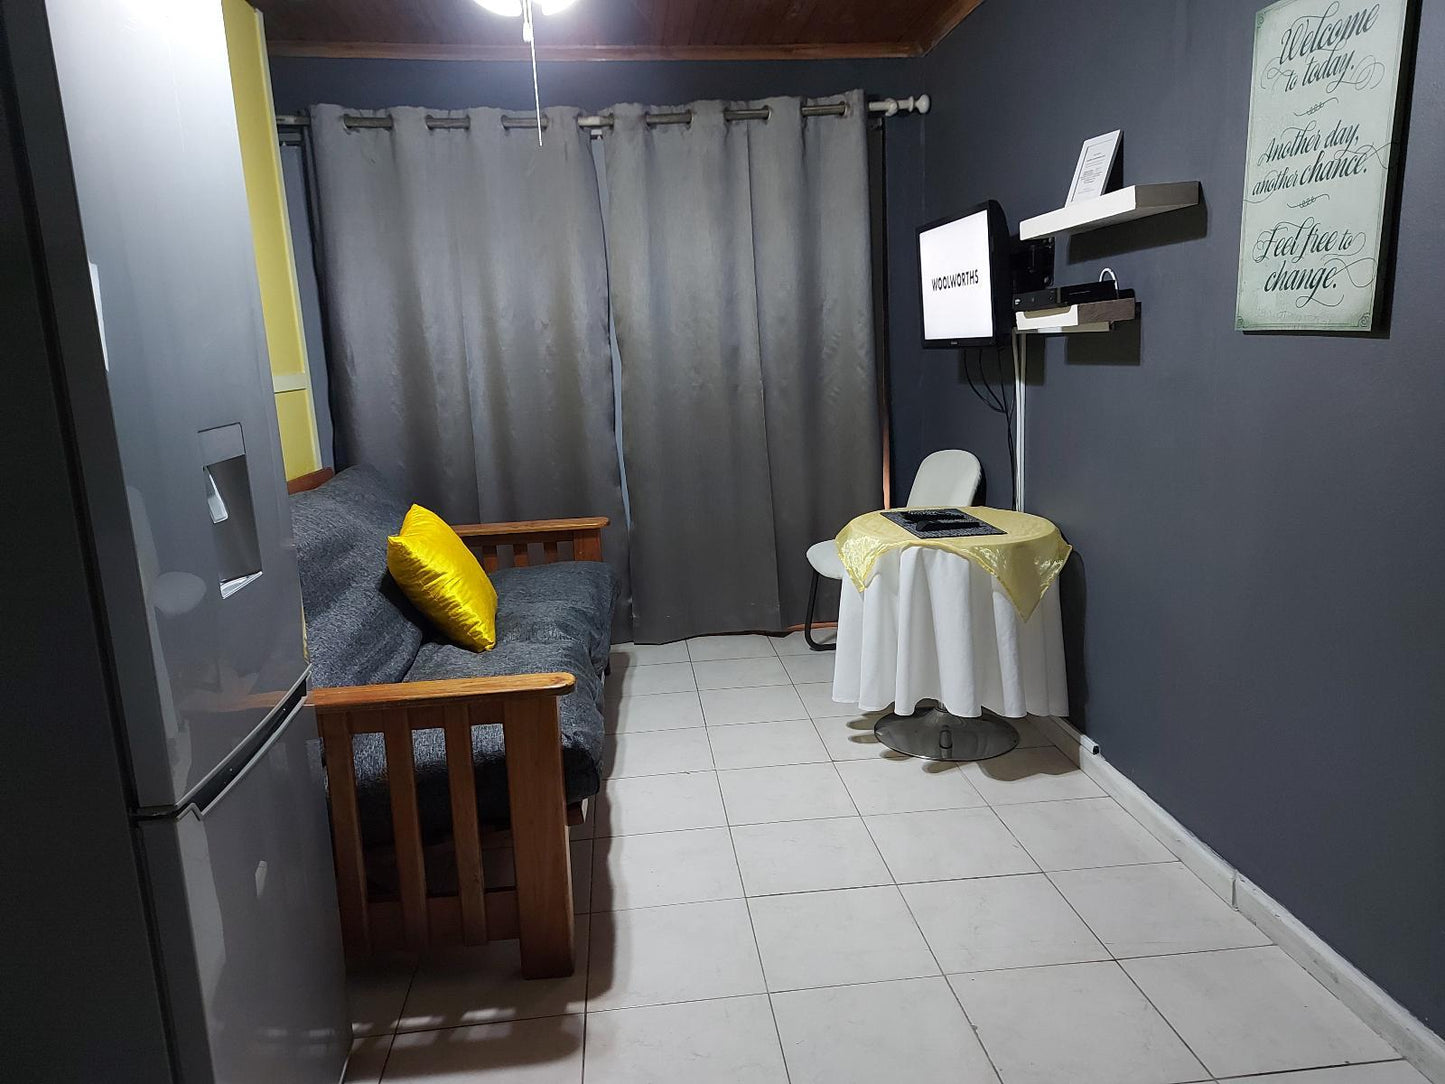 Self-Catering Unit No.1 - 1 Bedroom @ Beulah Land Guest House